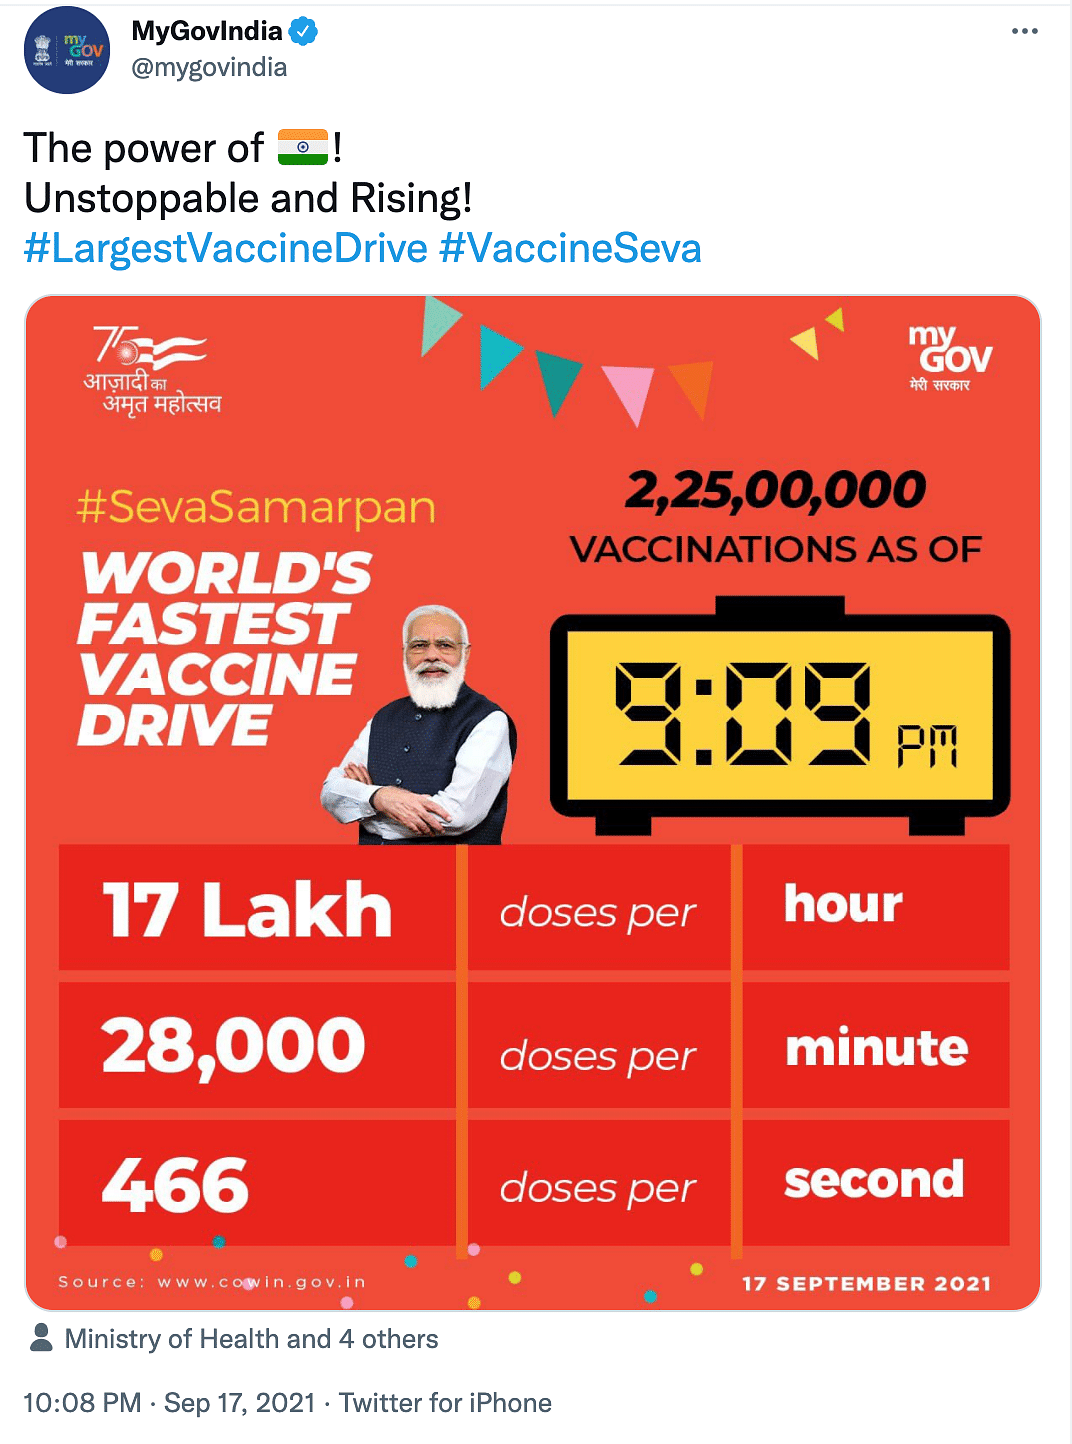 PM Modi hailed the massive vaccination drive as "a feat not even the most powerful nations have achieved."